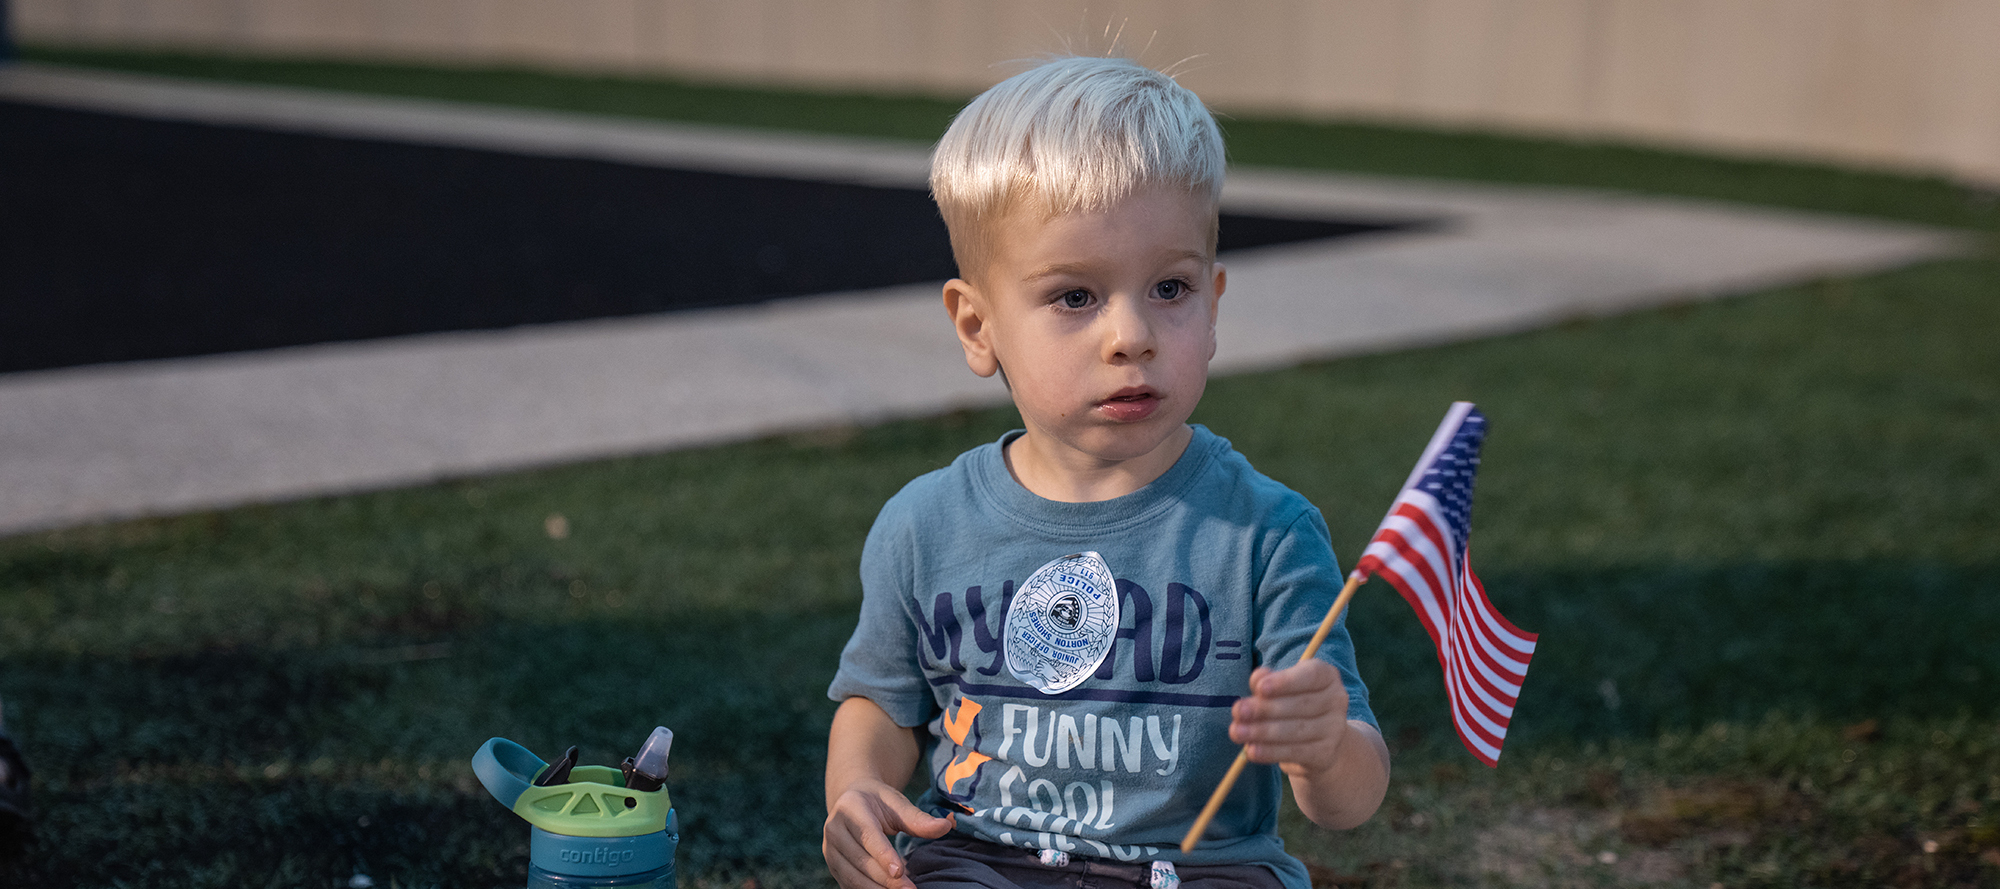 Boy with flag in hand